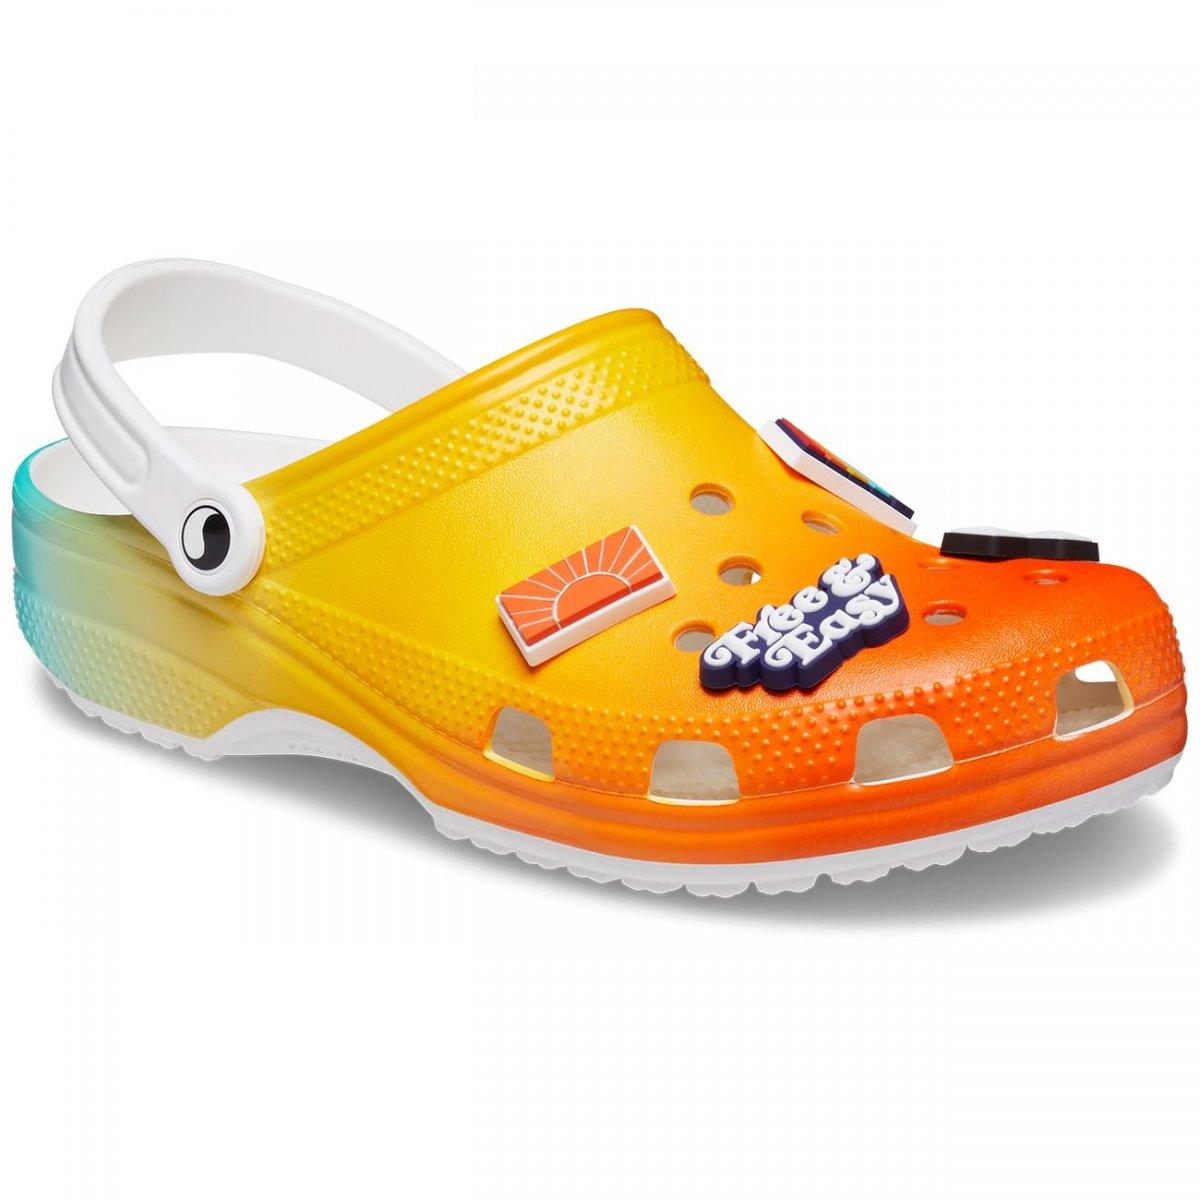 RARE Limited Edition Free & Easy X Crocs Classic Clog - mStore.Kh | mTravel Store